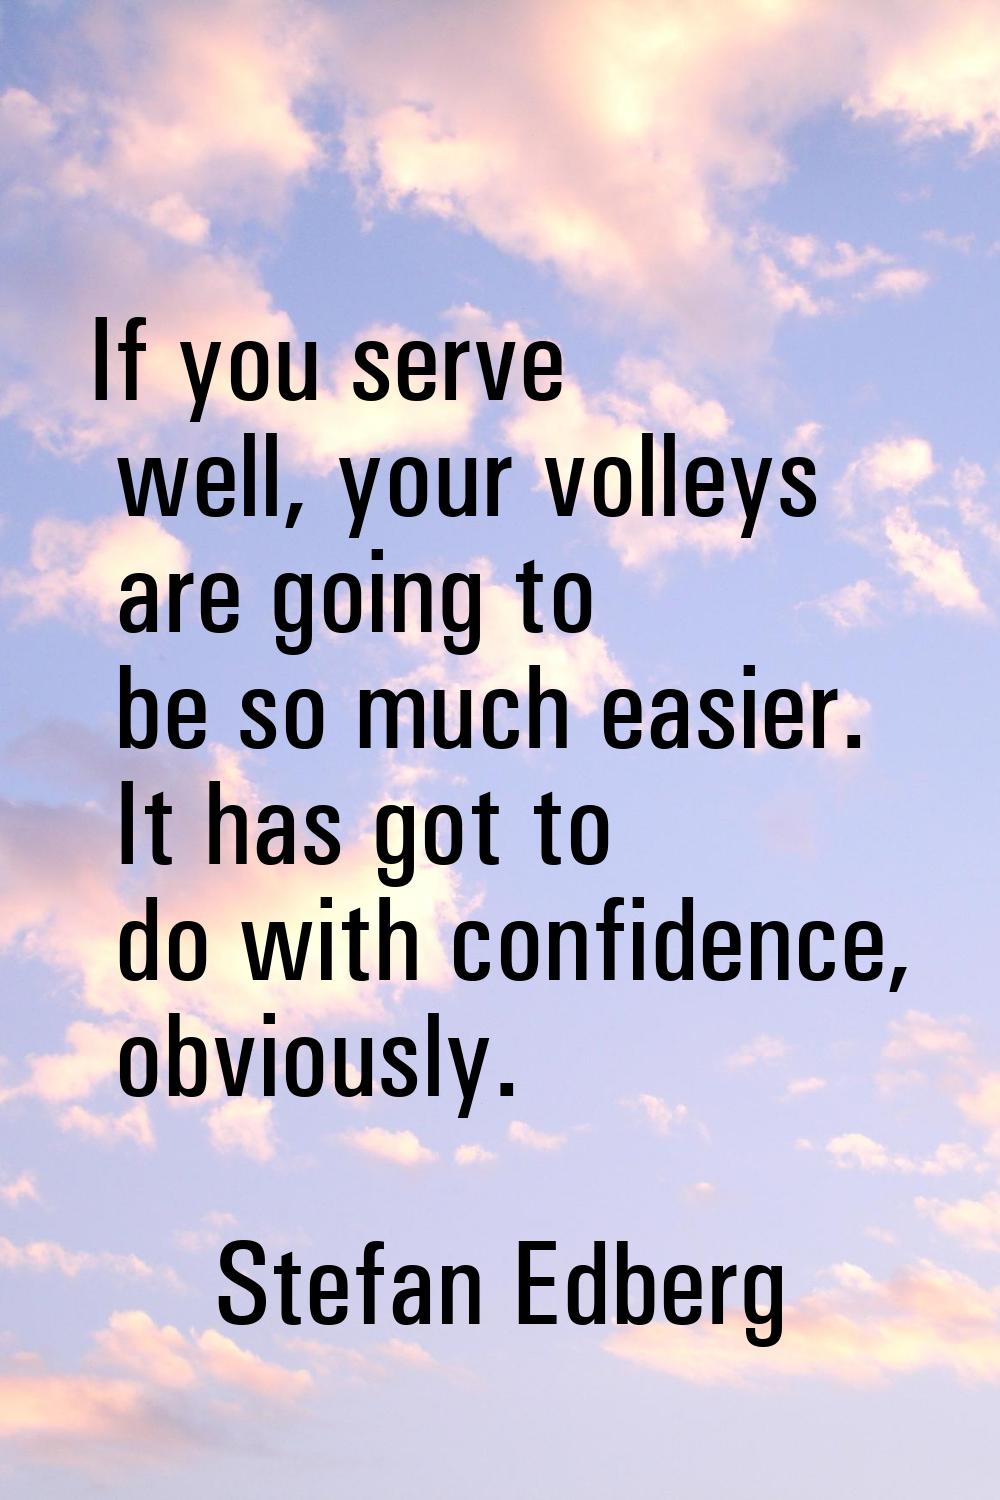 If you serve well, your volleys are going to be so much easier. It has got to do with confidence, o